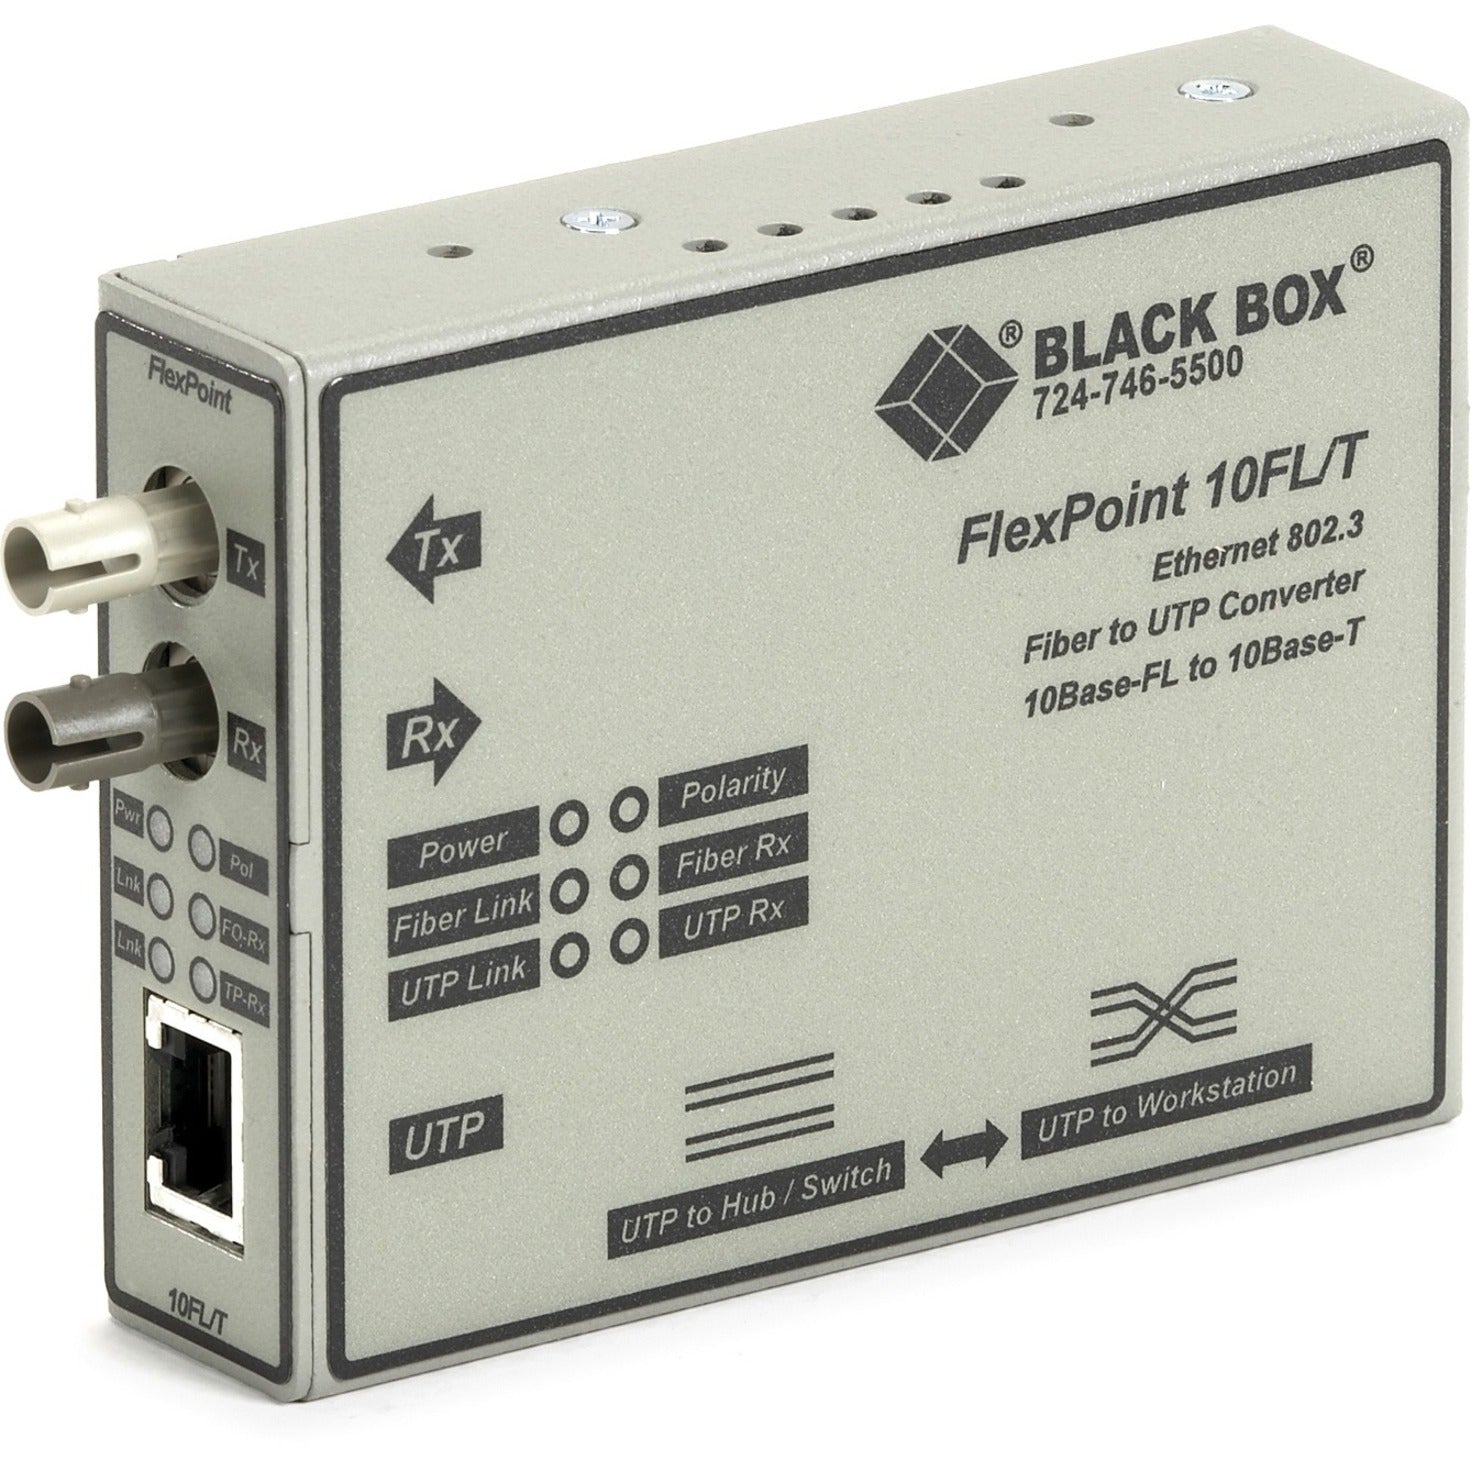 Black Box LMC212A-13MM-R3 FlexPoint Transceiver/Media Converter, Multi-mode, 3.11 Mile Distance Supported